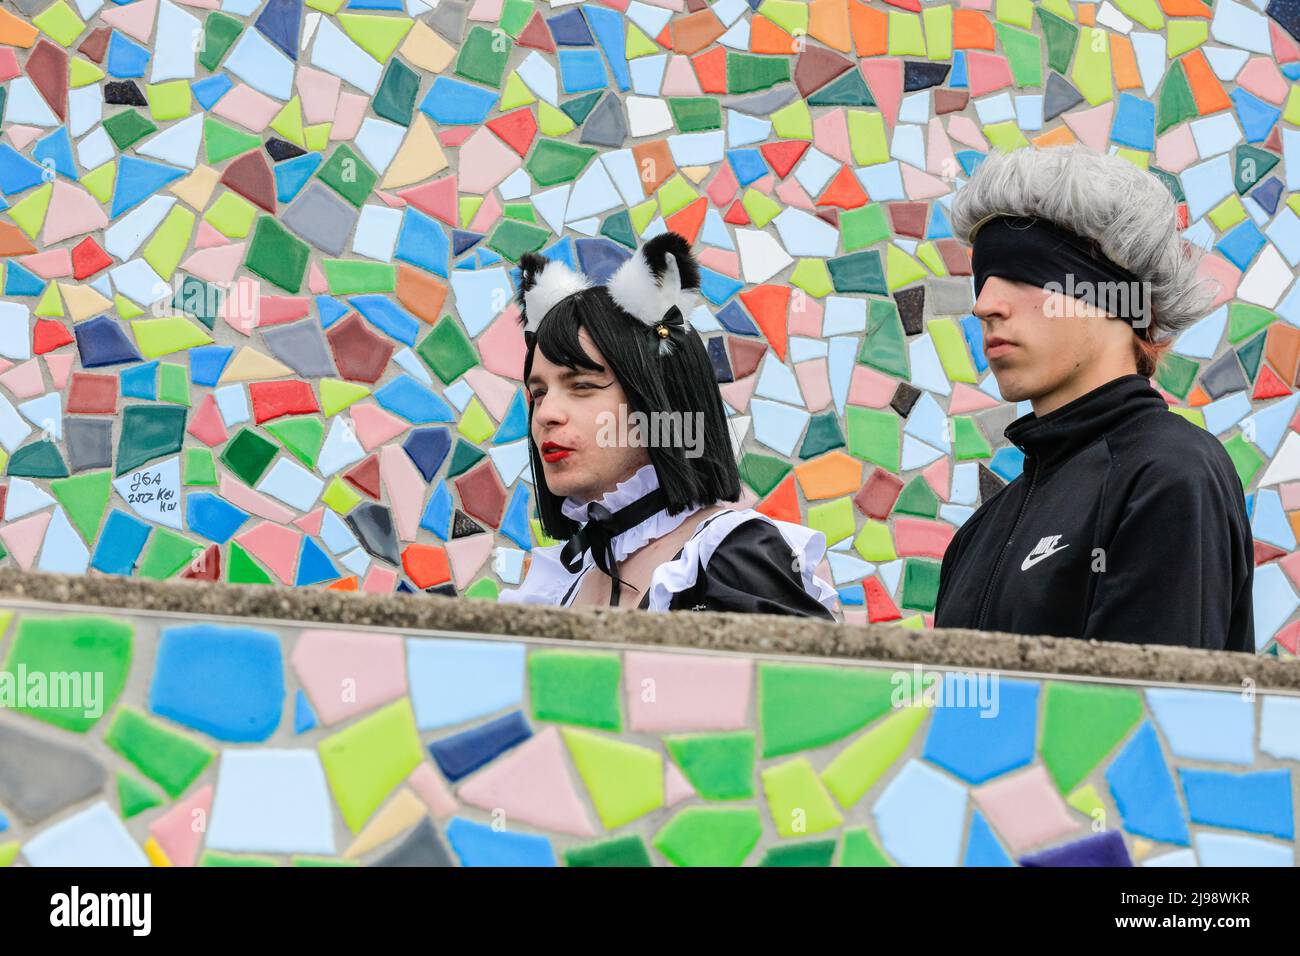 Düsseldorf, NRW, Germany. 21st May, 2022. Cosplayers walk along the mosaic wall on the riverbank. Tens of thousands of visitors and cosplayers enjoy the warm sunshine along the river Rhine embankment in their outfits inspired by Japanese anime, video and games. Stage performances, cosplay, stalls and demonstrations of Japanese culture, sports and traditions are featured at Düsseldorf's annual Japan Day, celebrating Japan and the Japanese community in the city. Düsseldorf is home to the largest Japanese community in Germany. Credit: Imageplotter/Alamy Live News Stock Photo